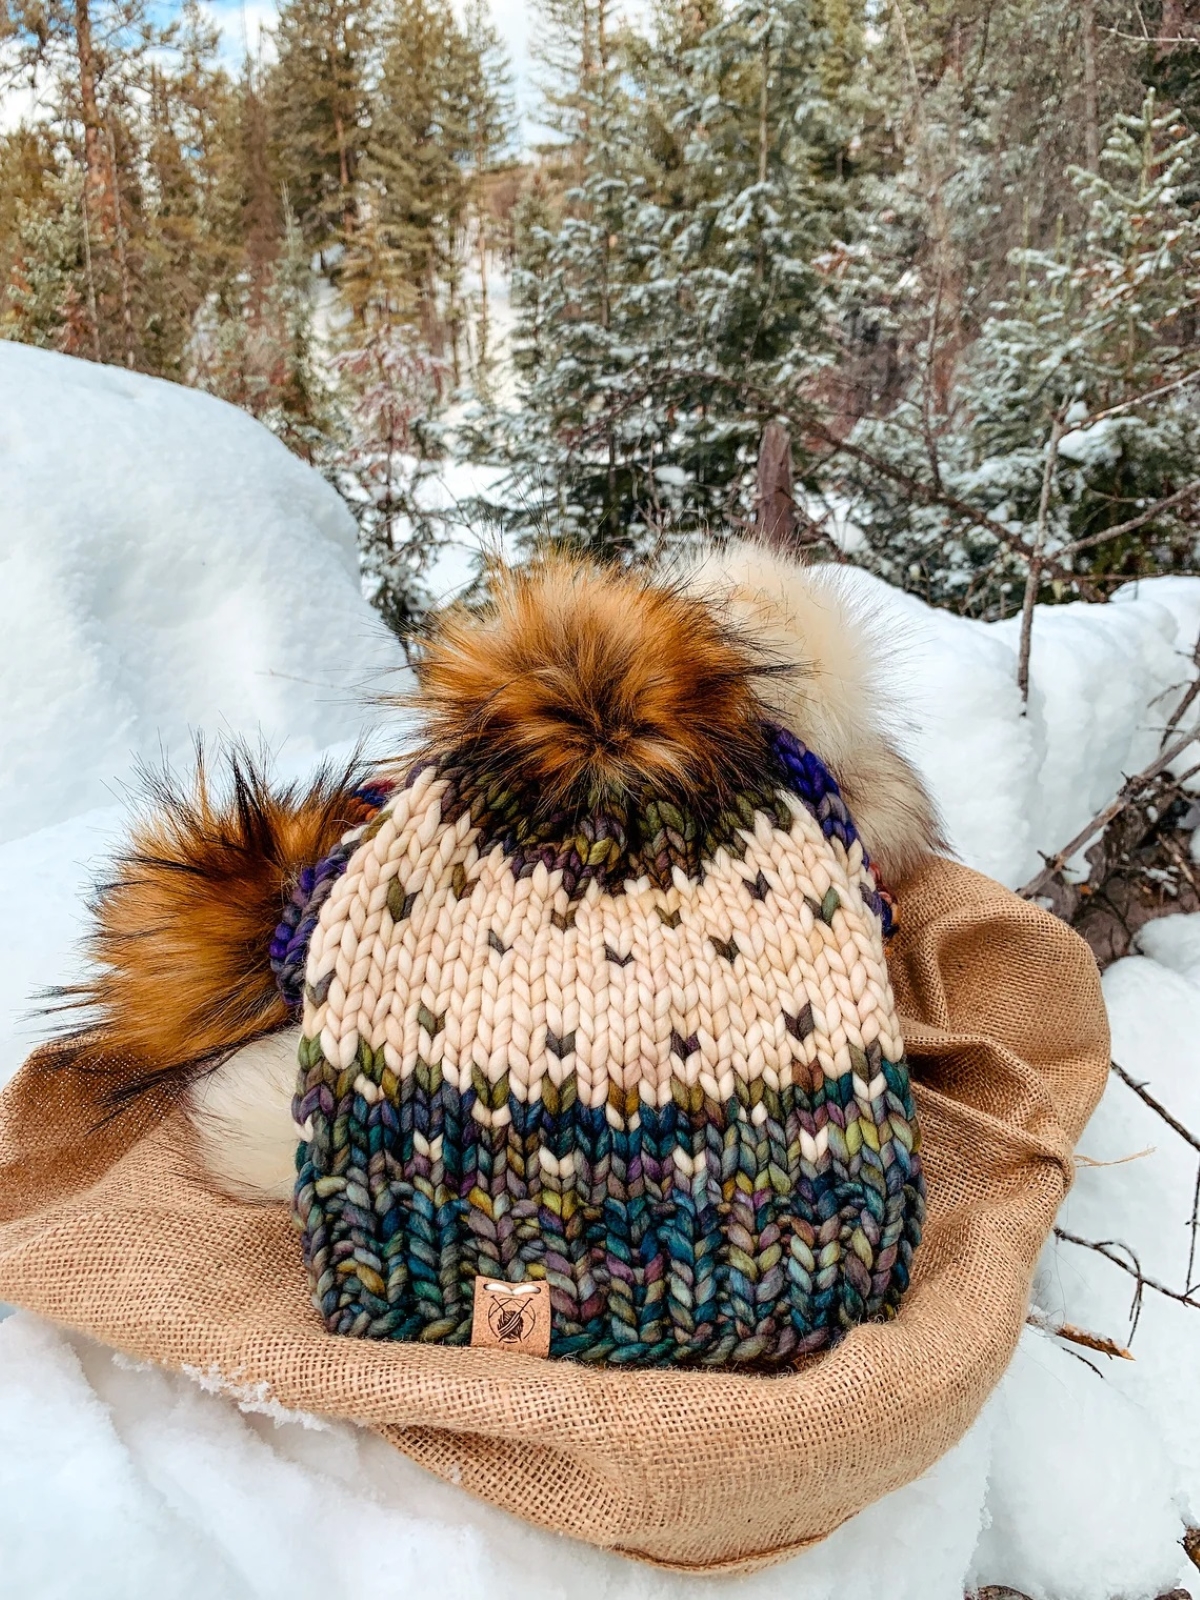 knitting patterns for beginners - knitted colorful beanie on snowy ground